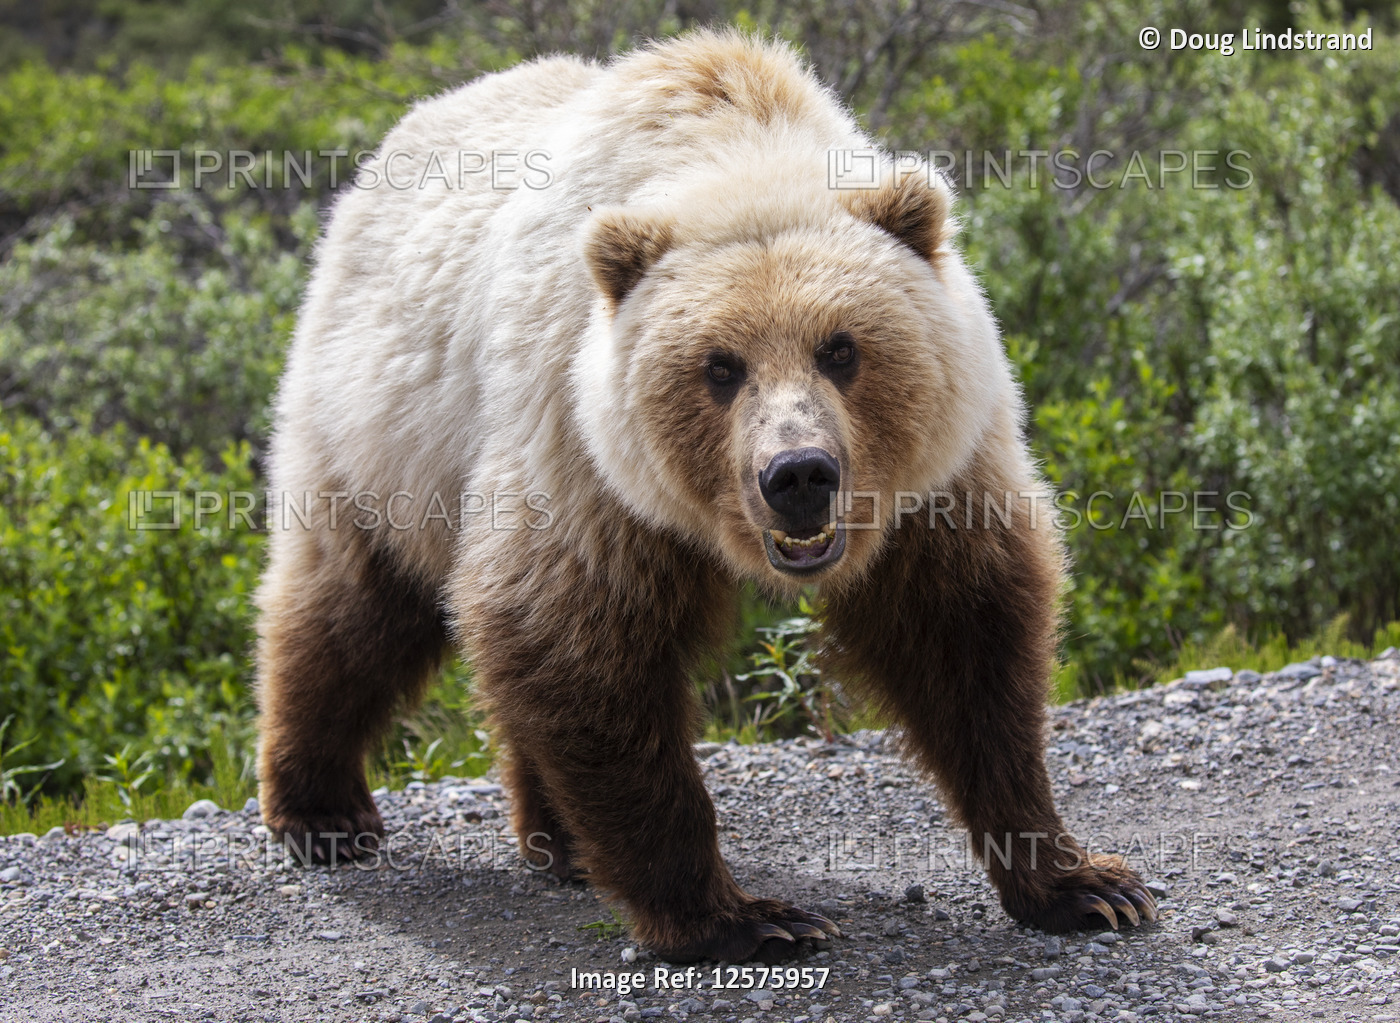 A light colored Grizzly bear (Ursus arctos horribilis) stares at the ...